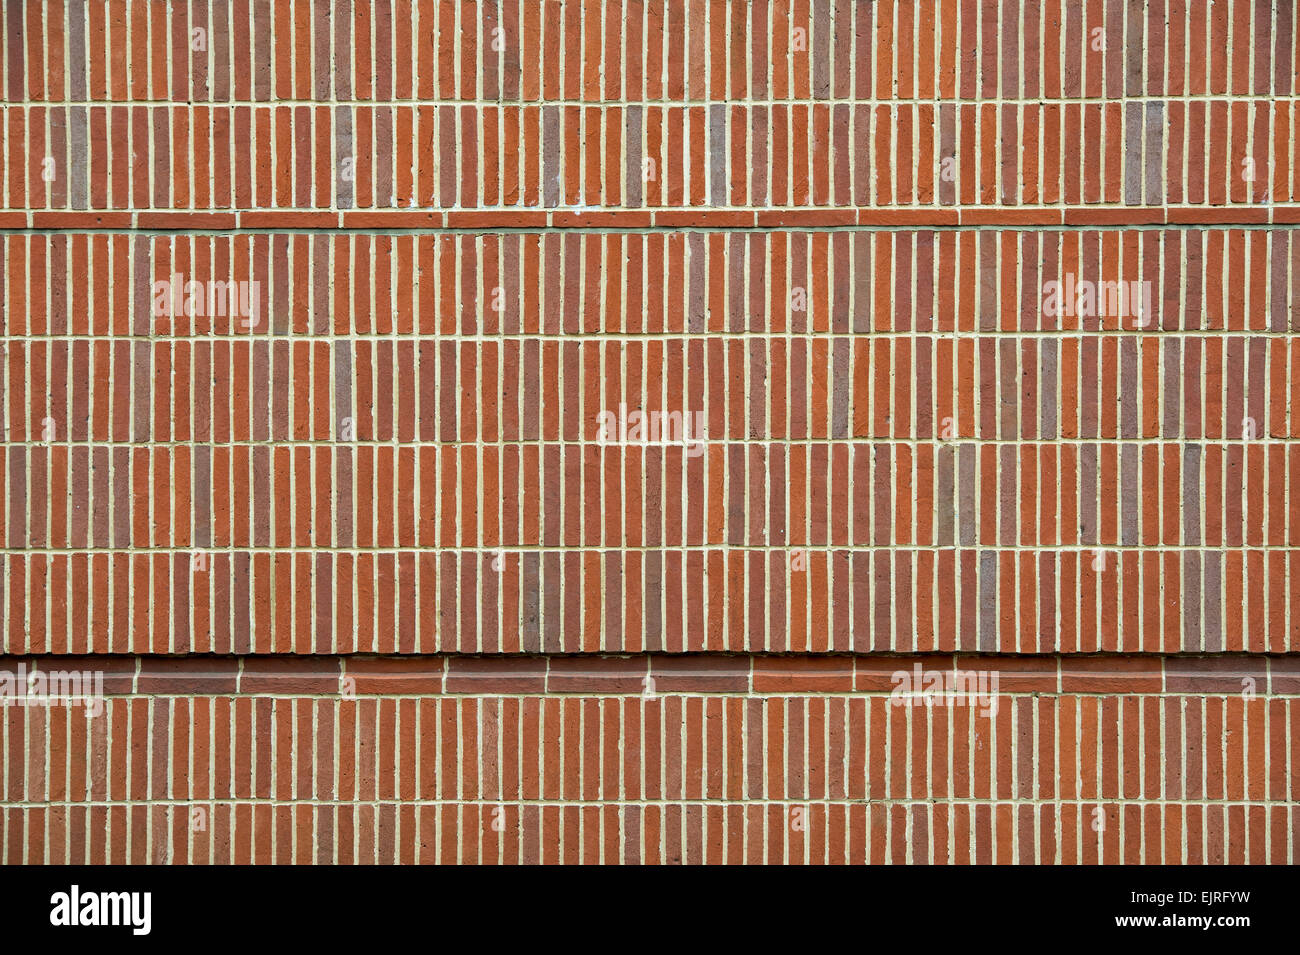 Ziegel-Wand-Fassade, Keble College in Oxford, England Stockfoto